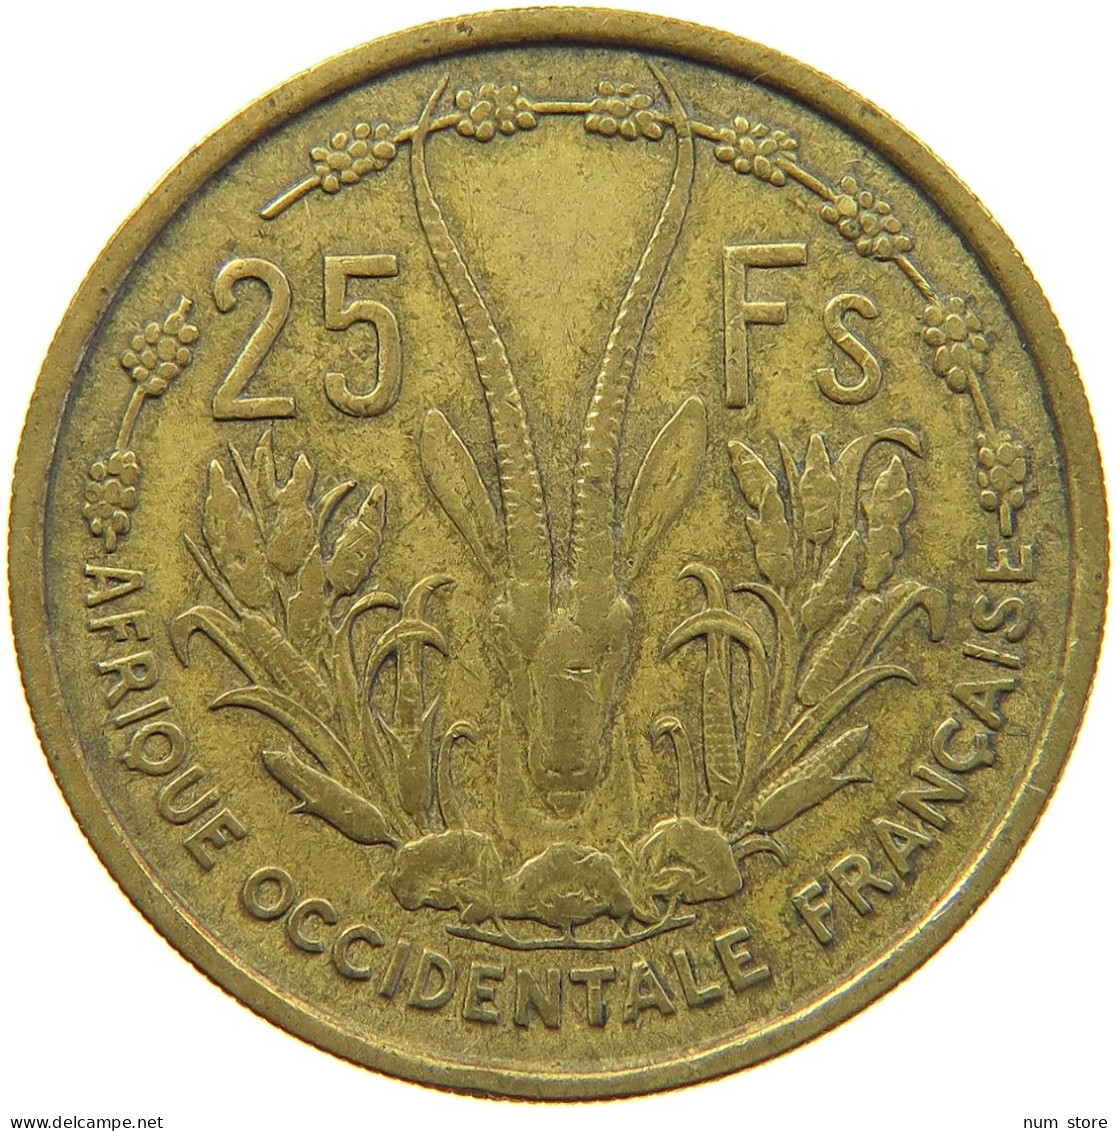 FRENCH WEST AFRICA 25 FRANCS 1956  #s029 0121 - French West Africa